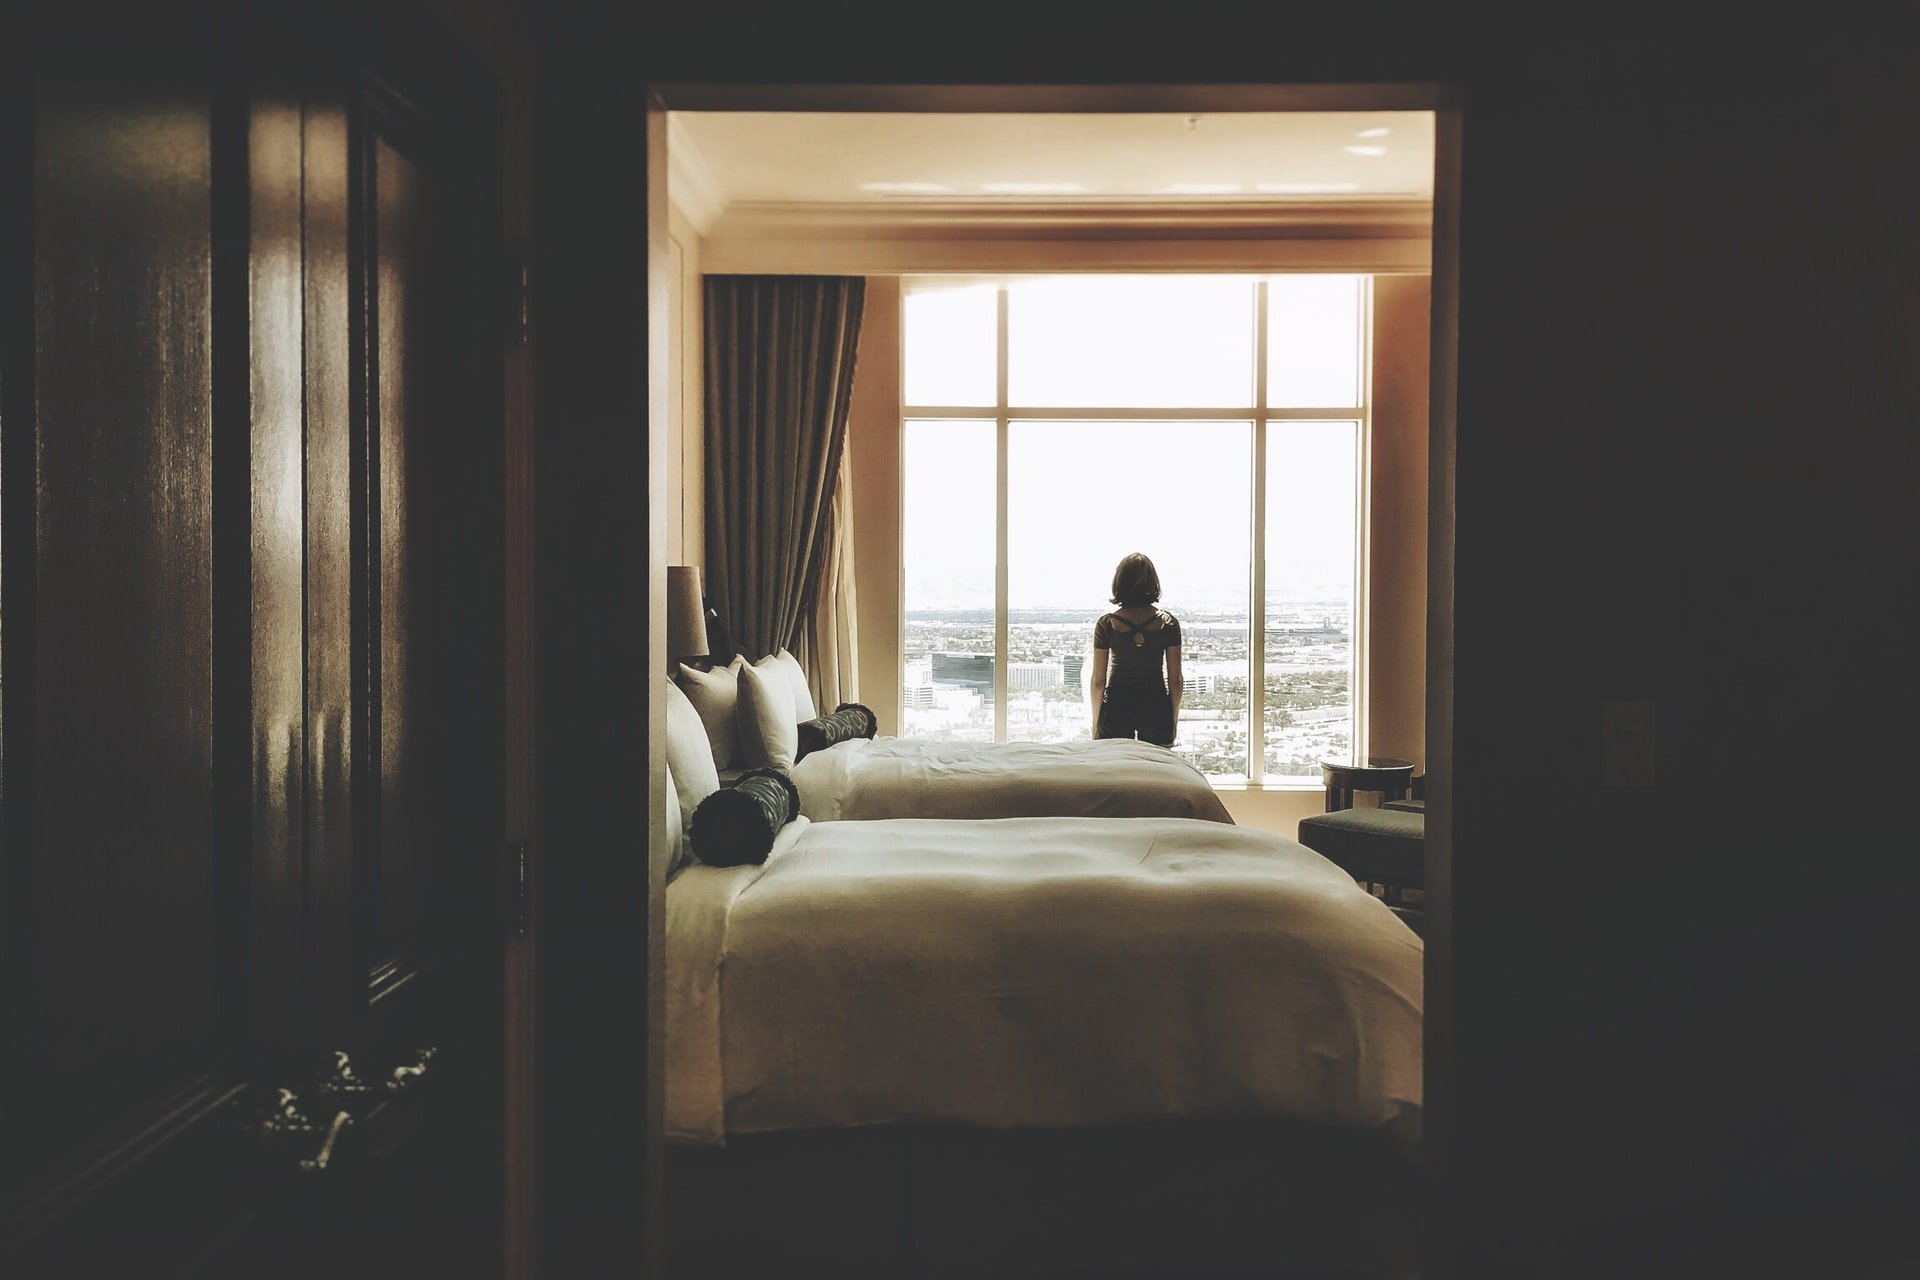 Woman standing in a hotel room | Source: Unsplash